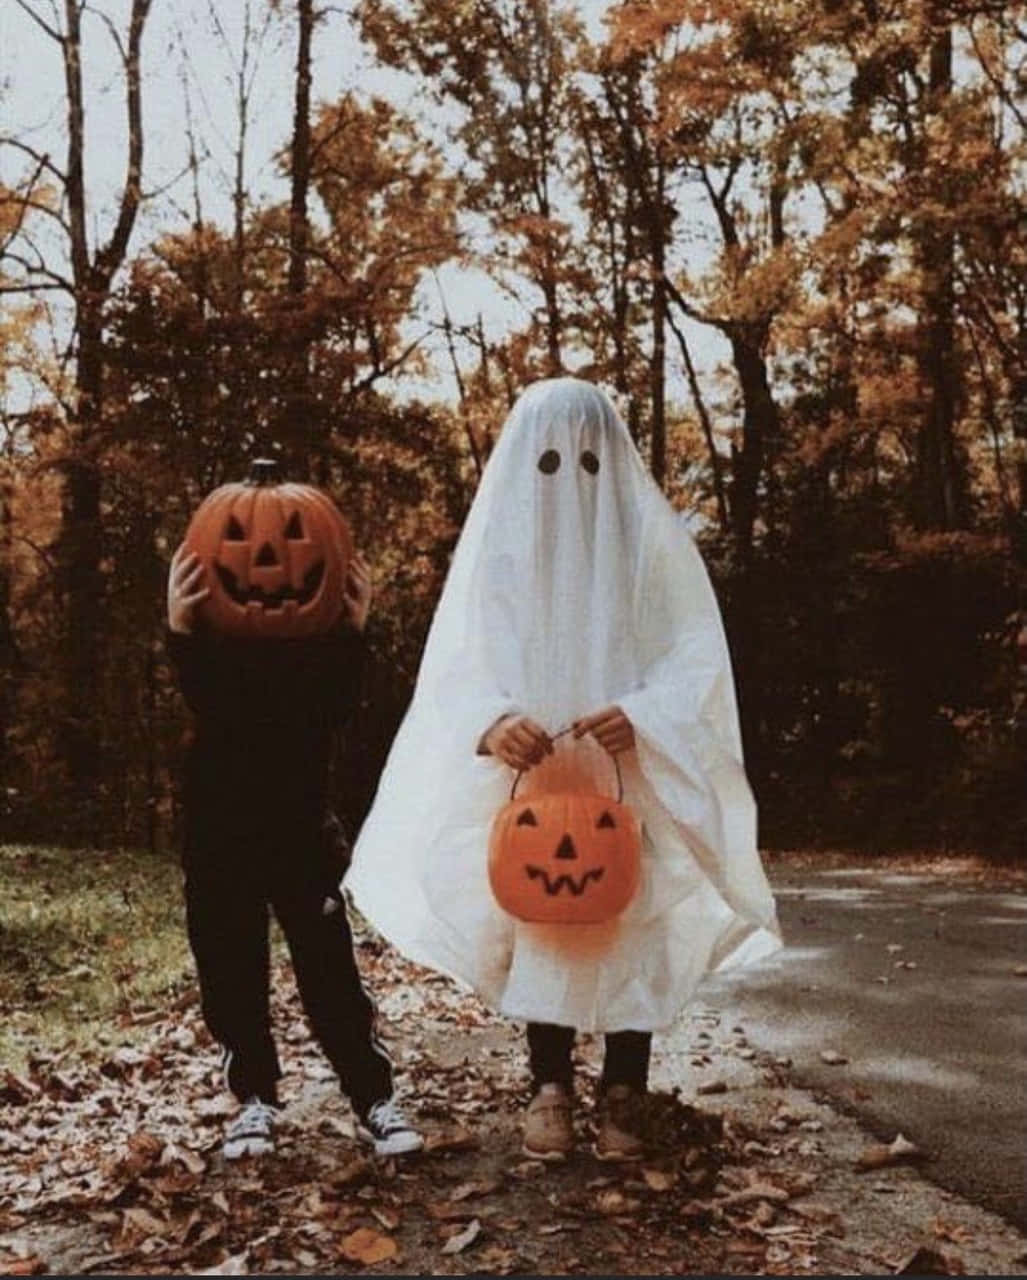 Boo Ghost And Jack O Lantern Costumes Aesthetic Autumn Halloween Wallpaper